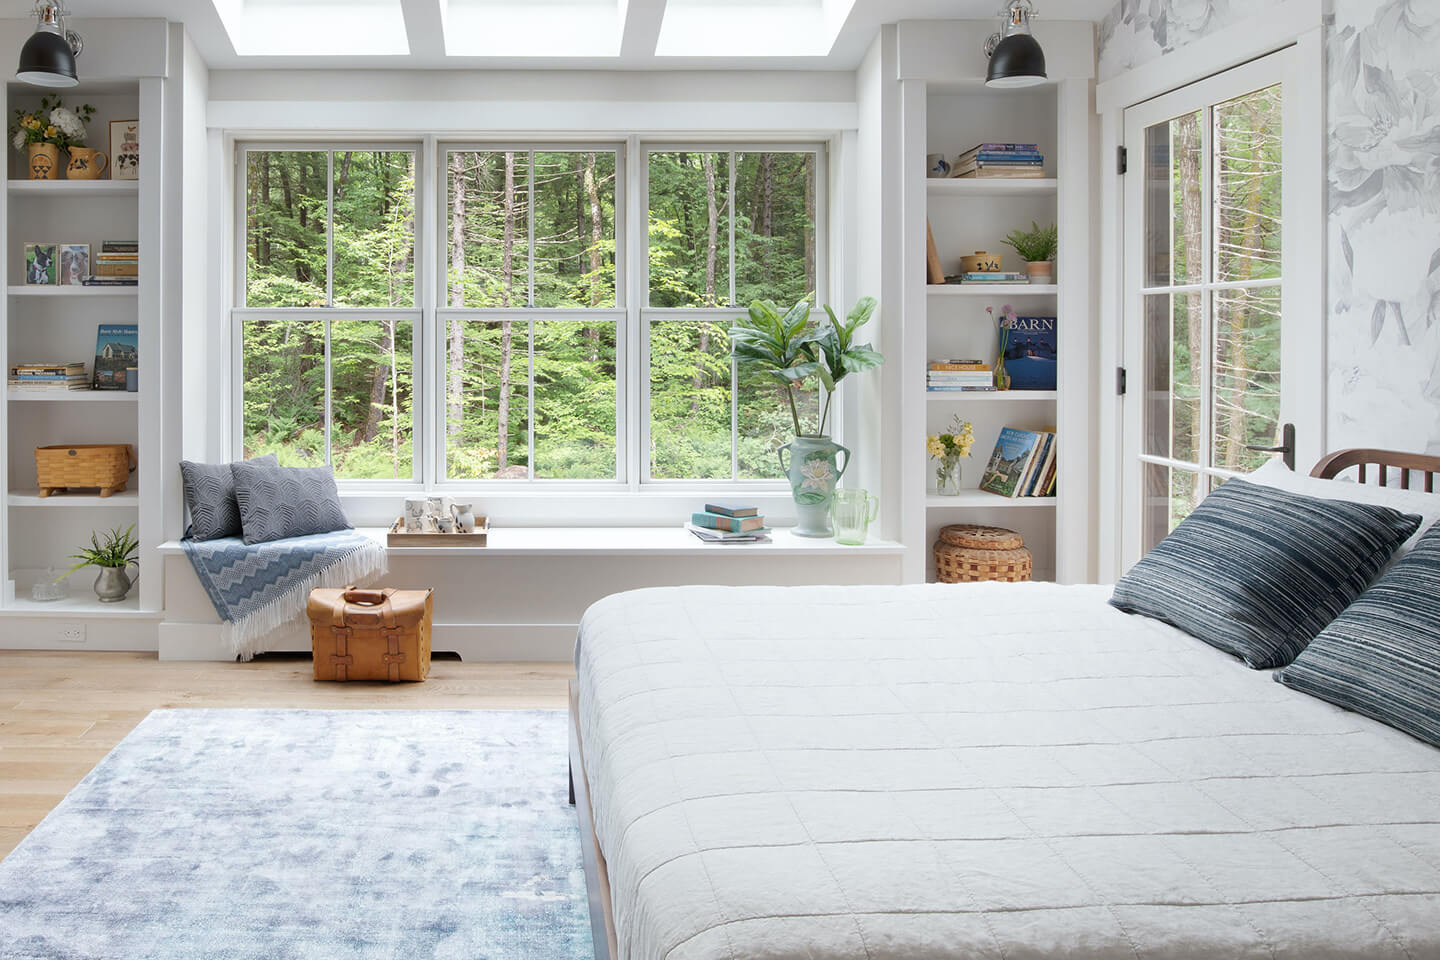 A bedroom with Marvin double hung windows and a window seat.